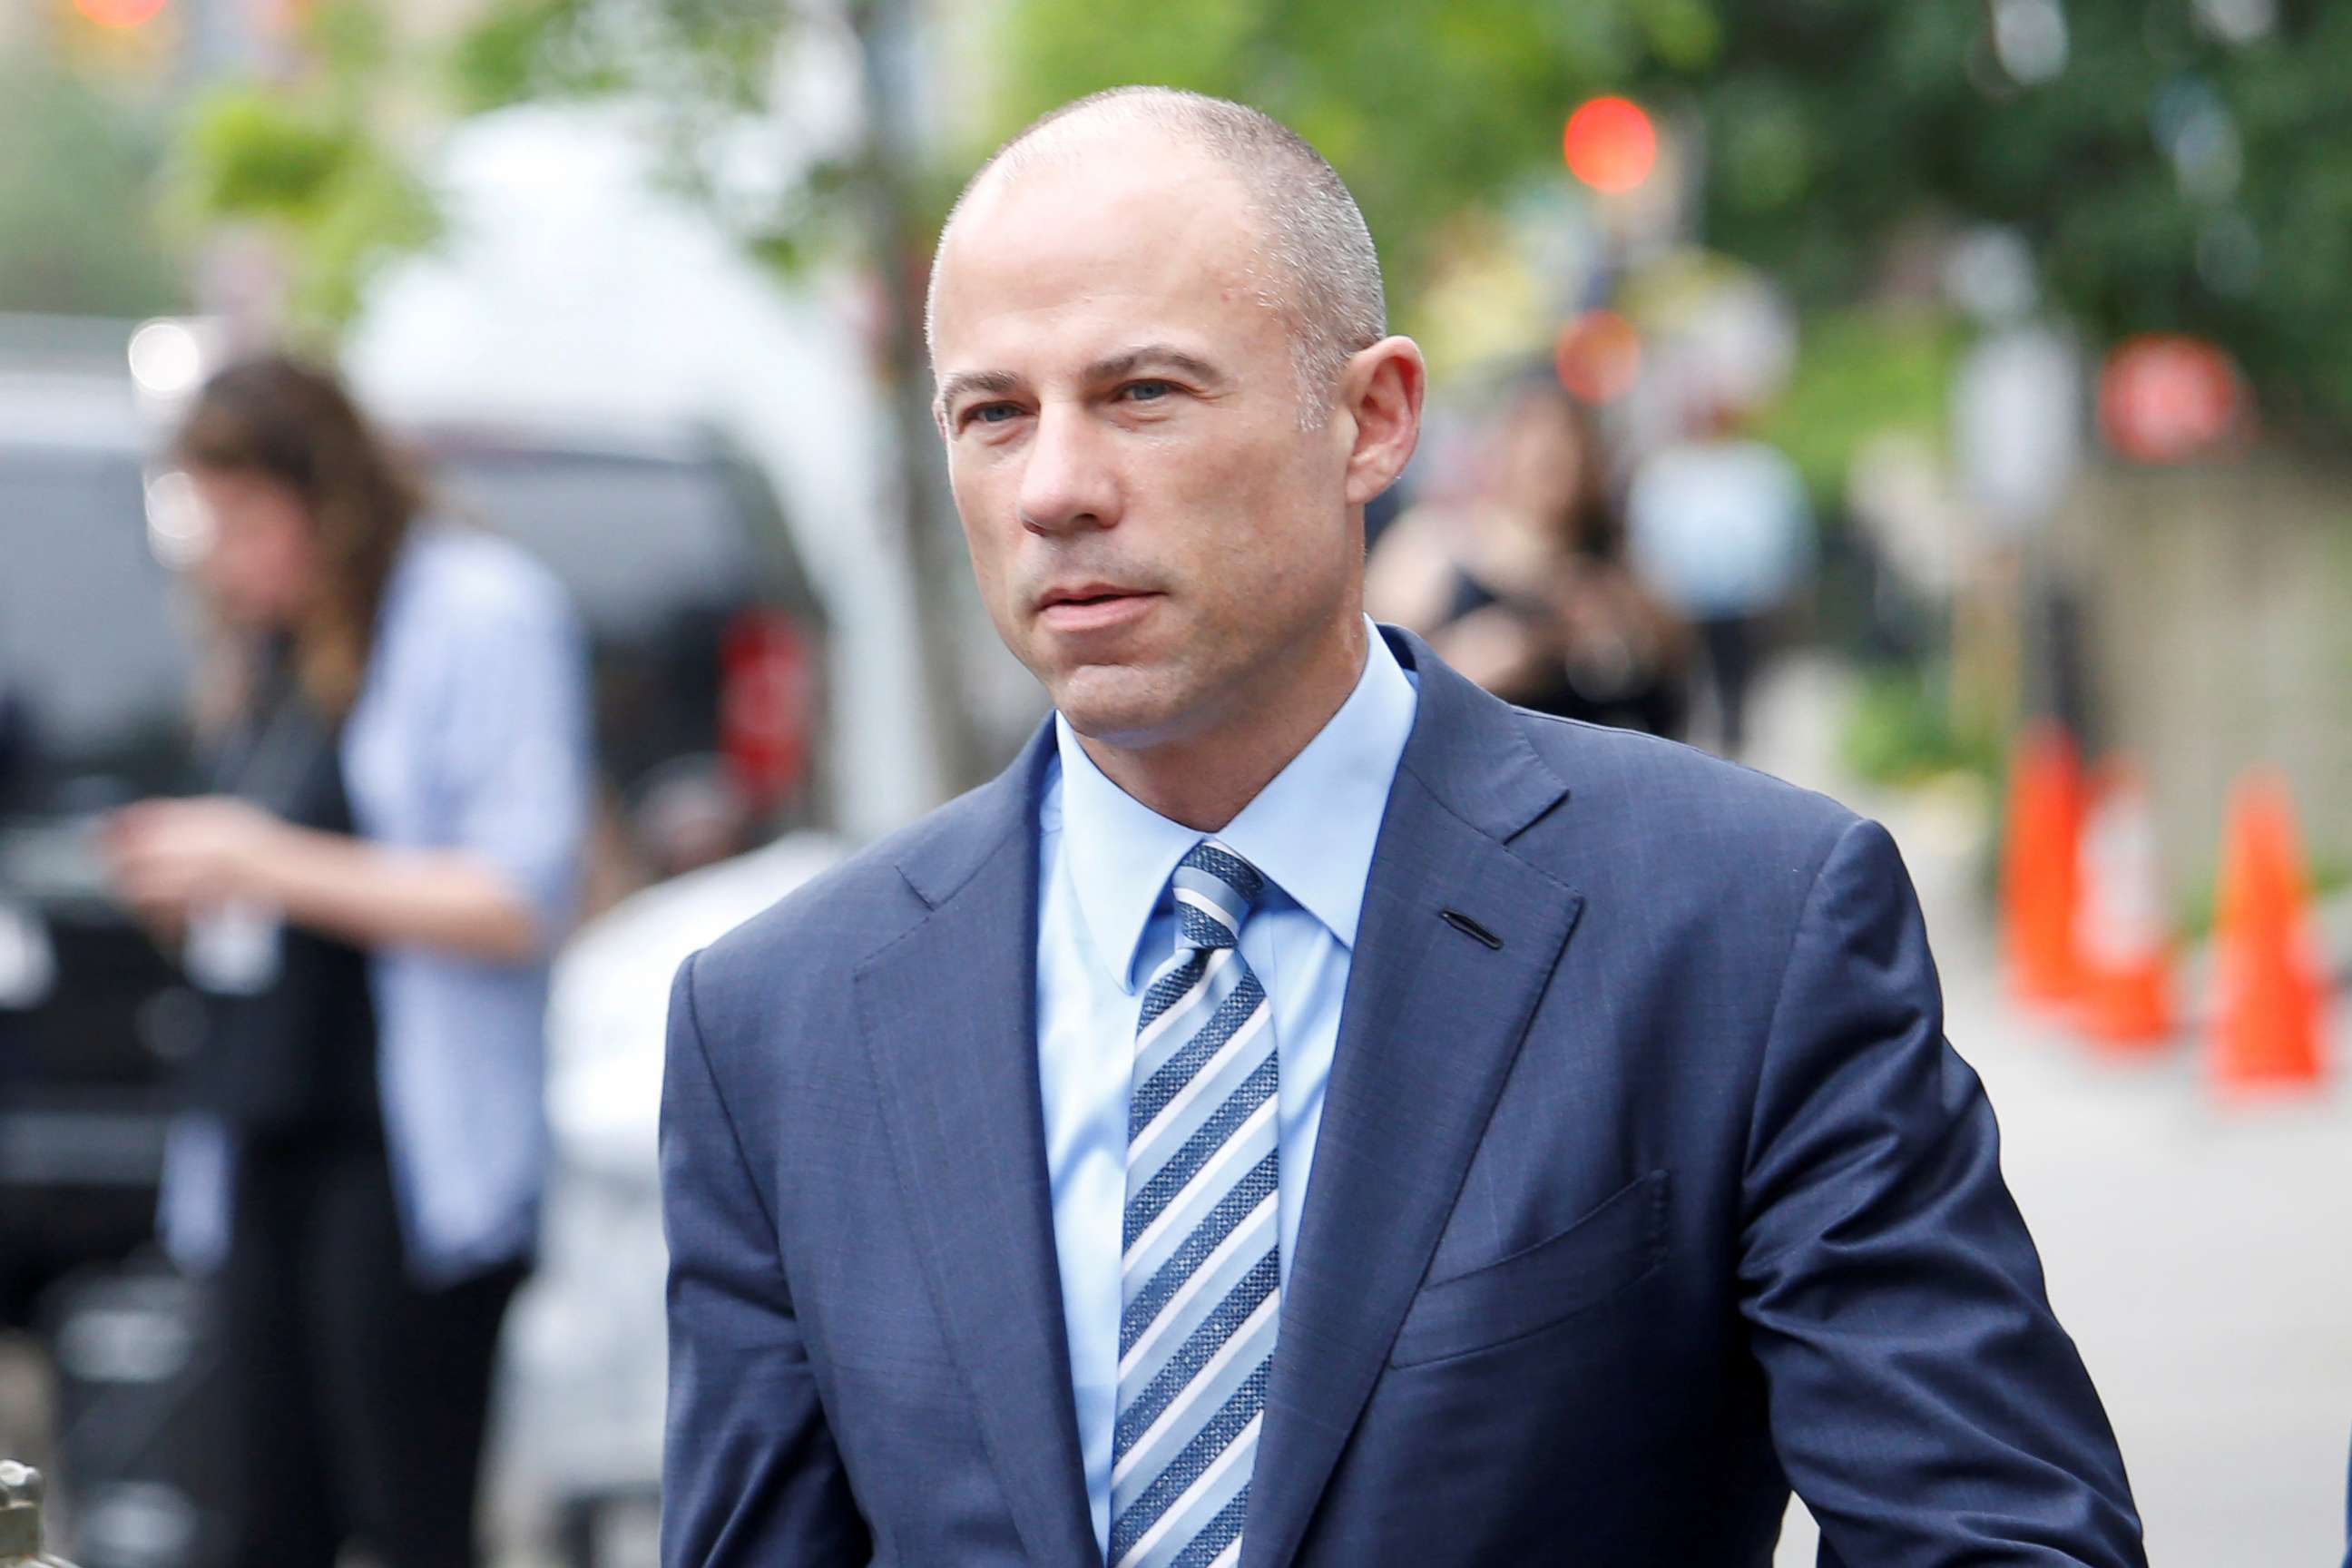 PHOTO: Michael Avenatti, the attorney of adult-film star Stephanie Clifford, known as Stormy Daniels, arrives at federal court in New York, May 30, 2018.